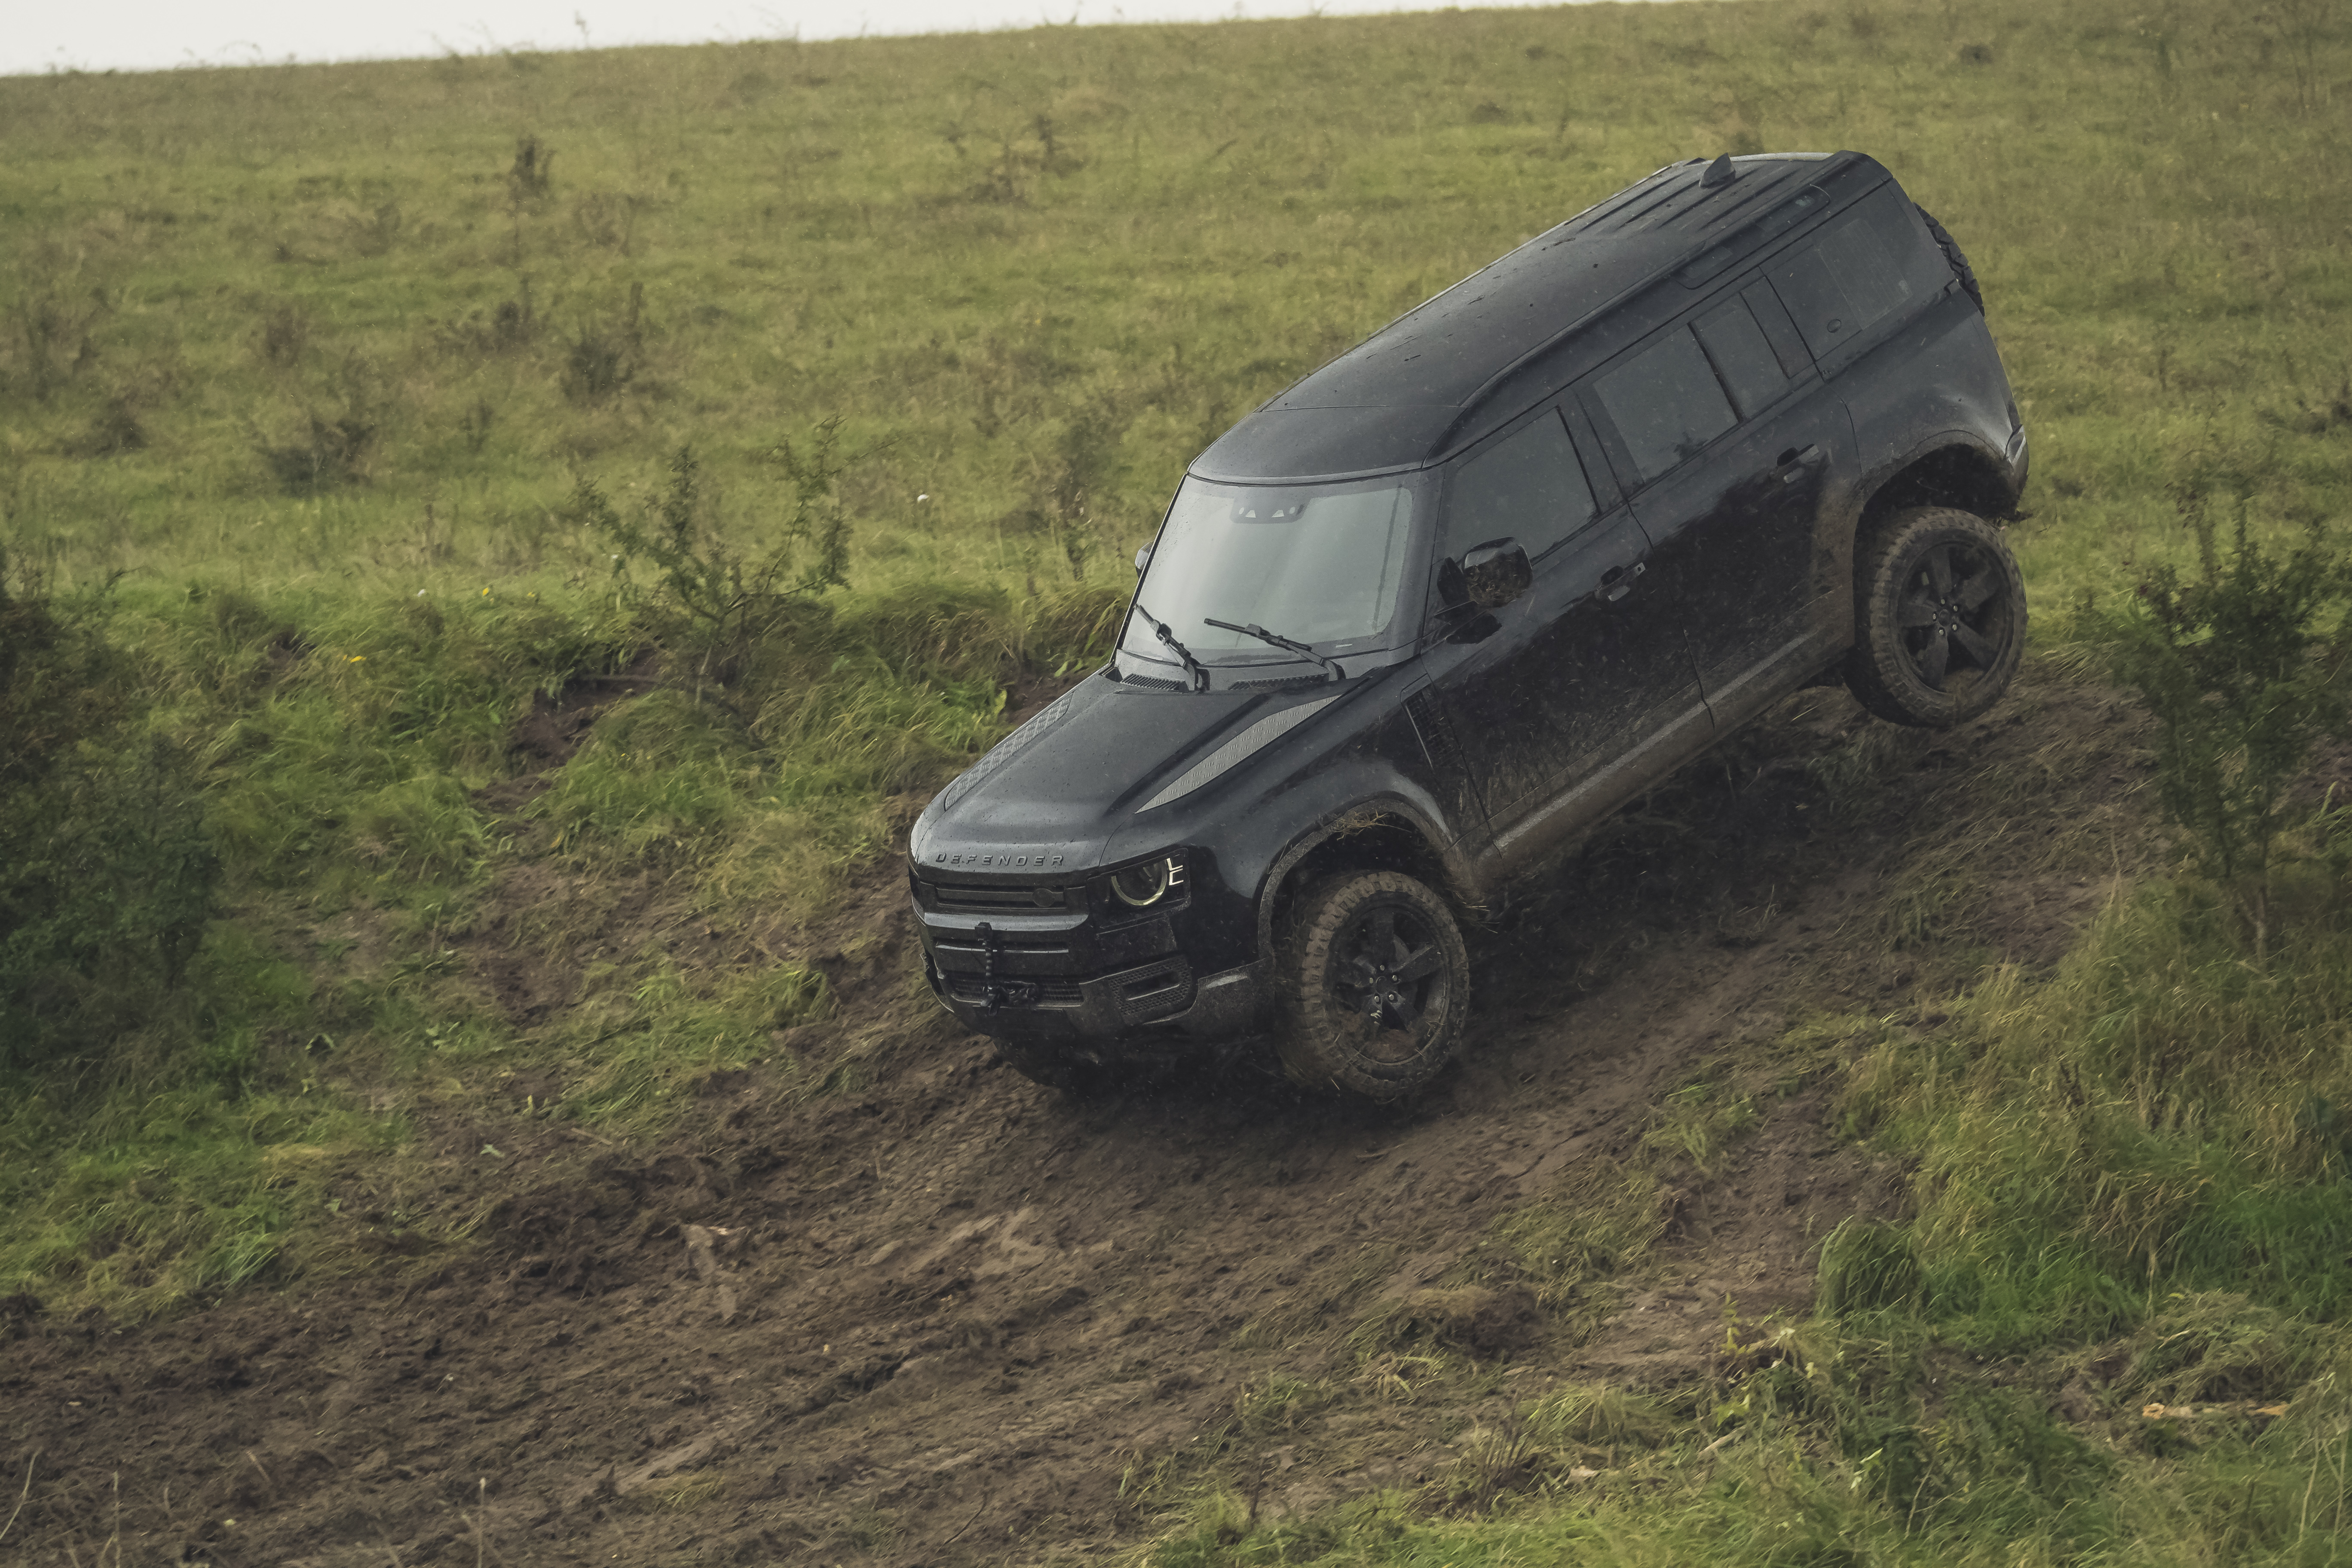 Behind the scenes image of the New Land Rover Defender featured in No Time To Die